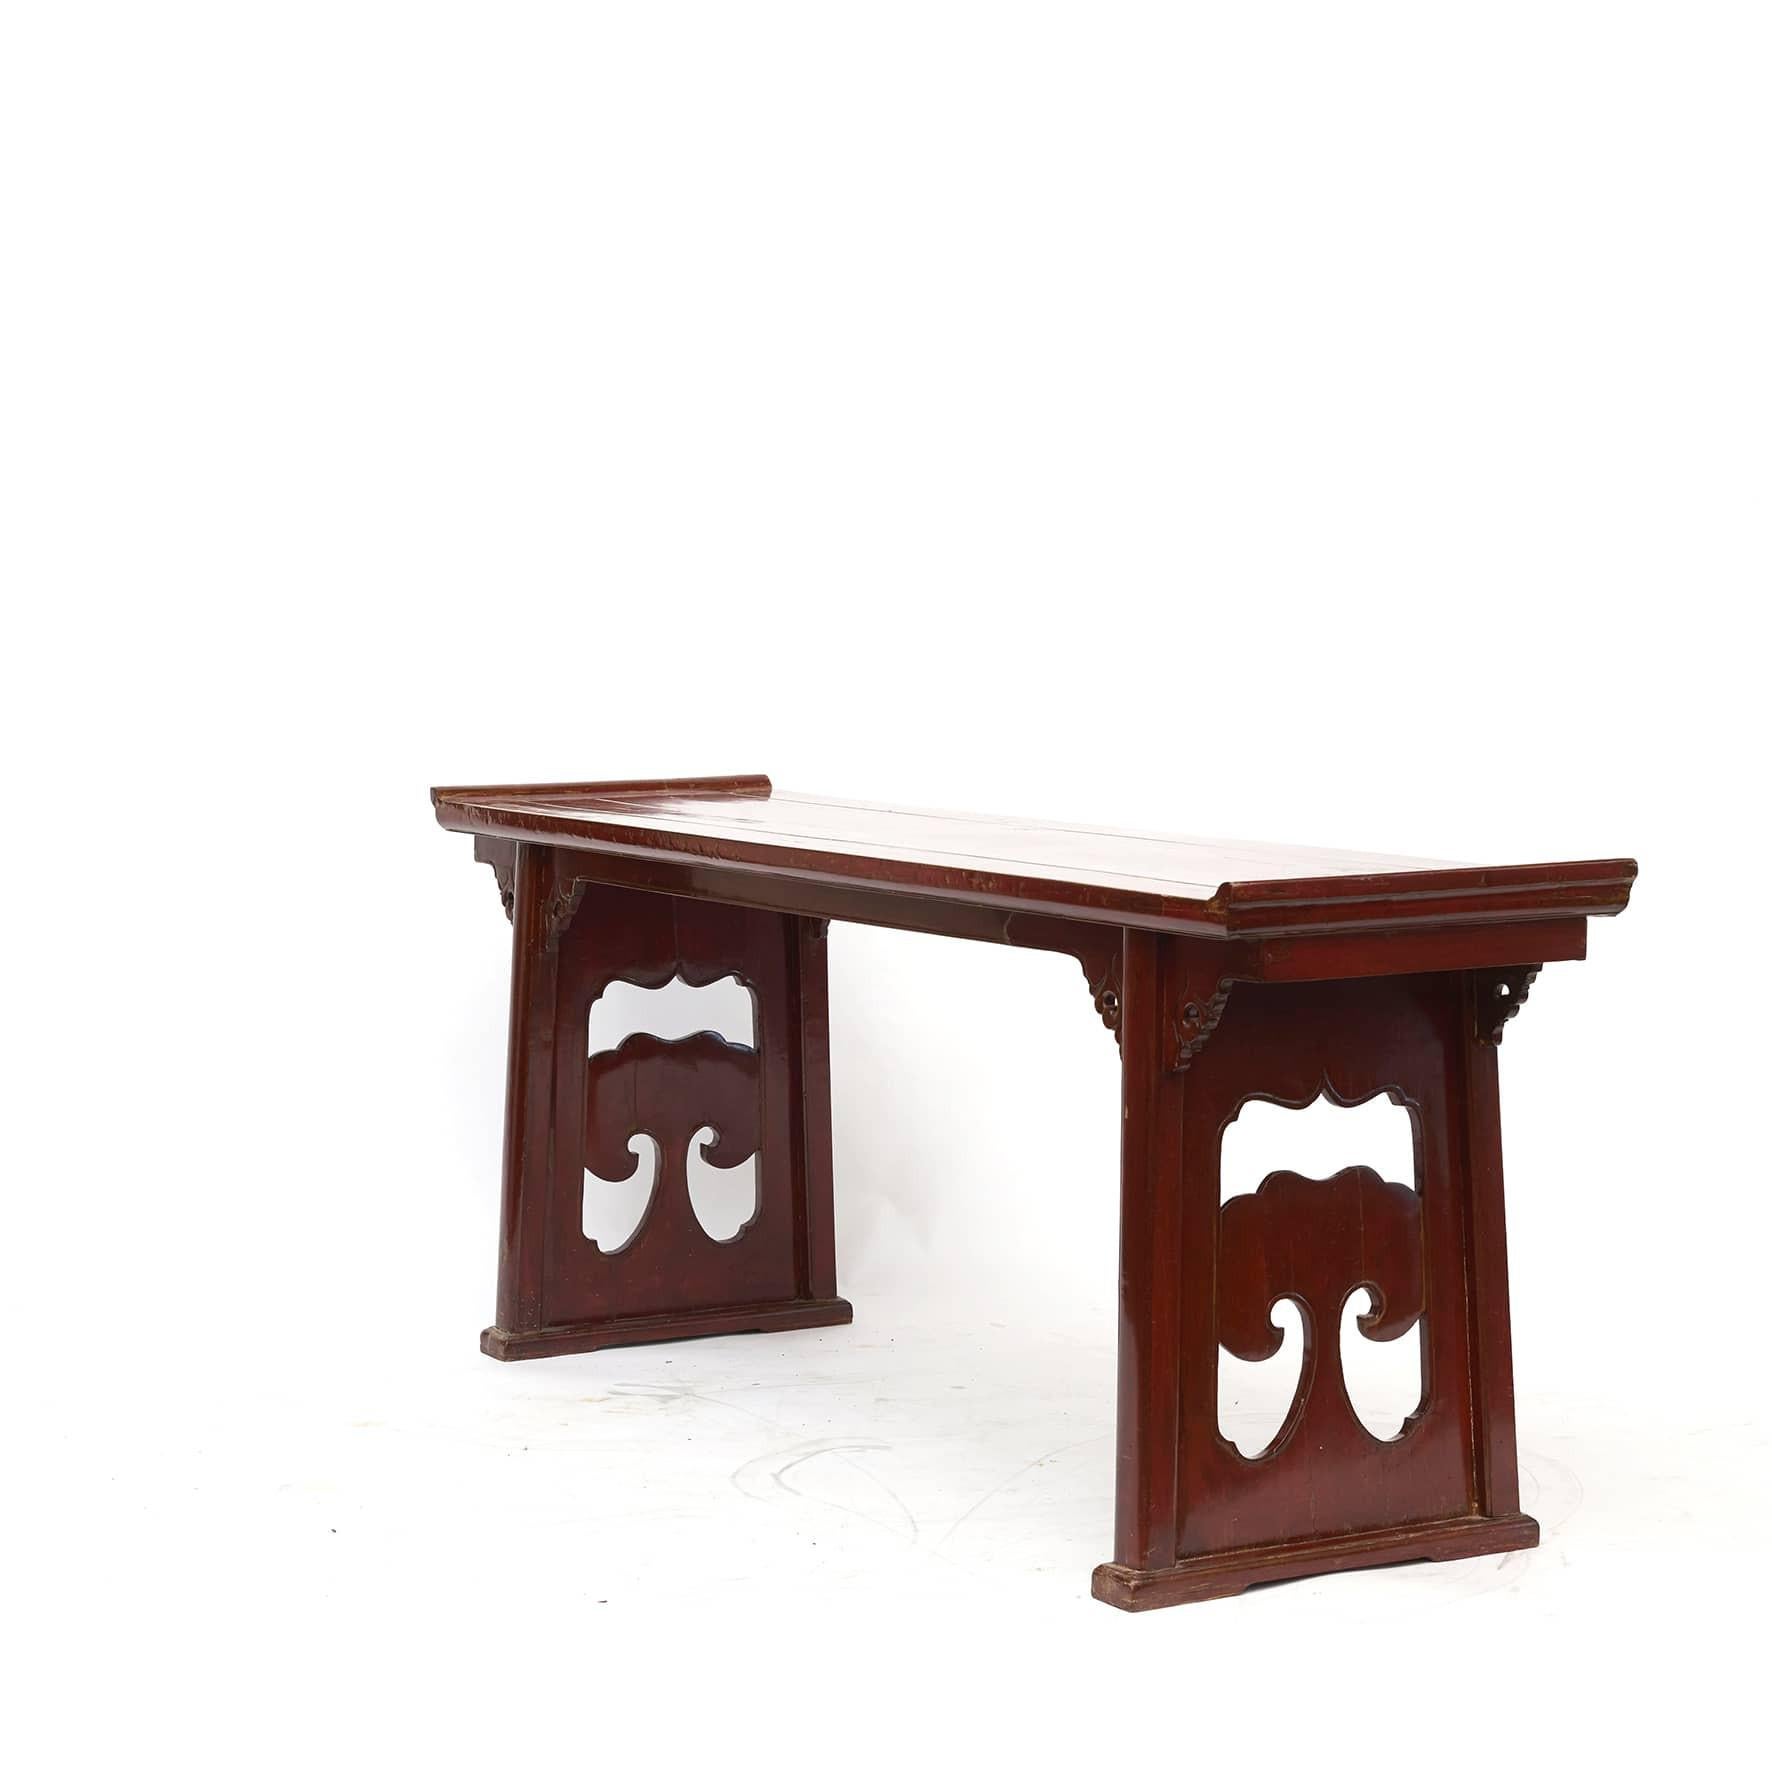 Elegant console side table / altar table with well-preserved original red lacquer.
Freestanding with identical details on the sides.
Originally used in Chinese houses in the welcome room with porcelain vases on.

From Jiangsu Province, China